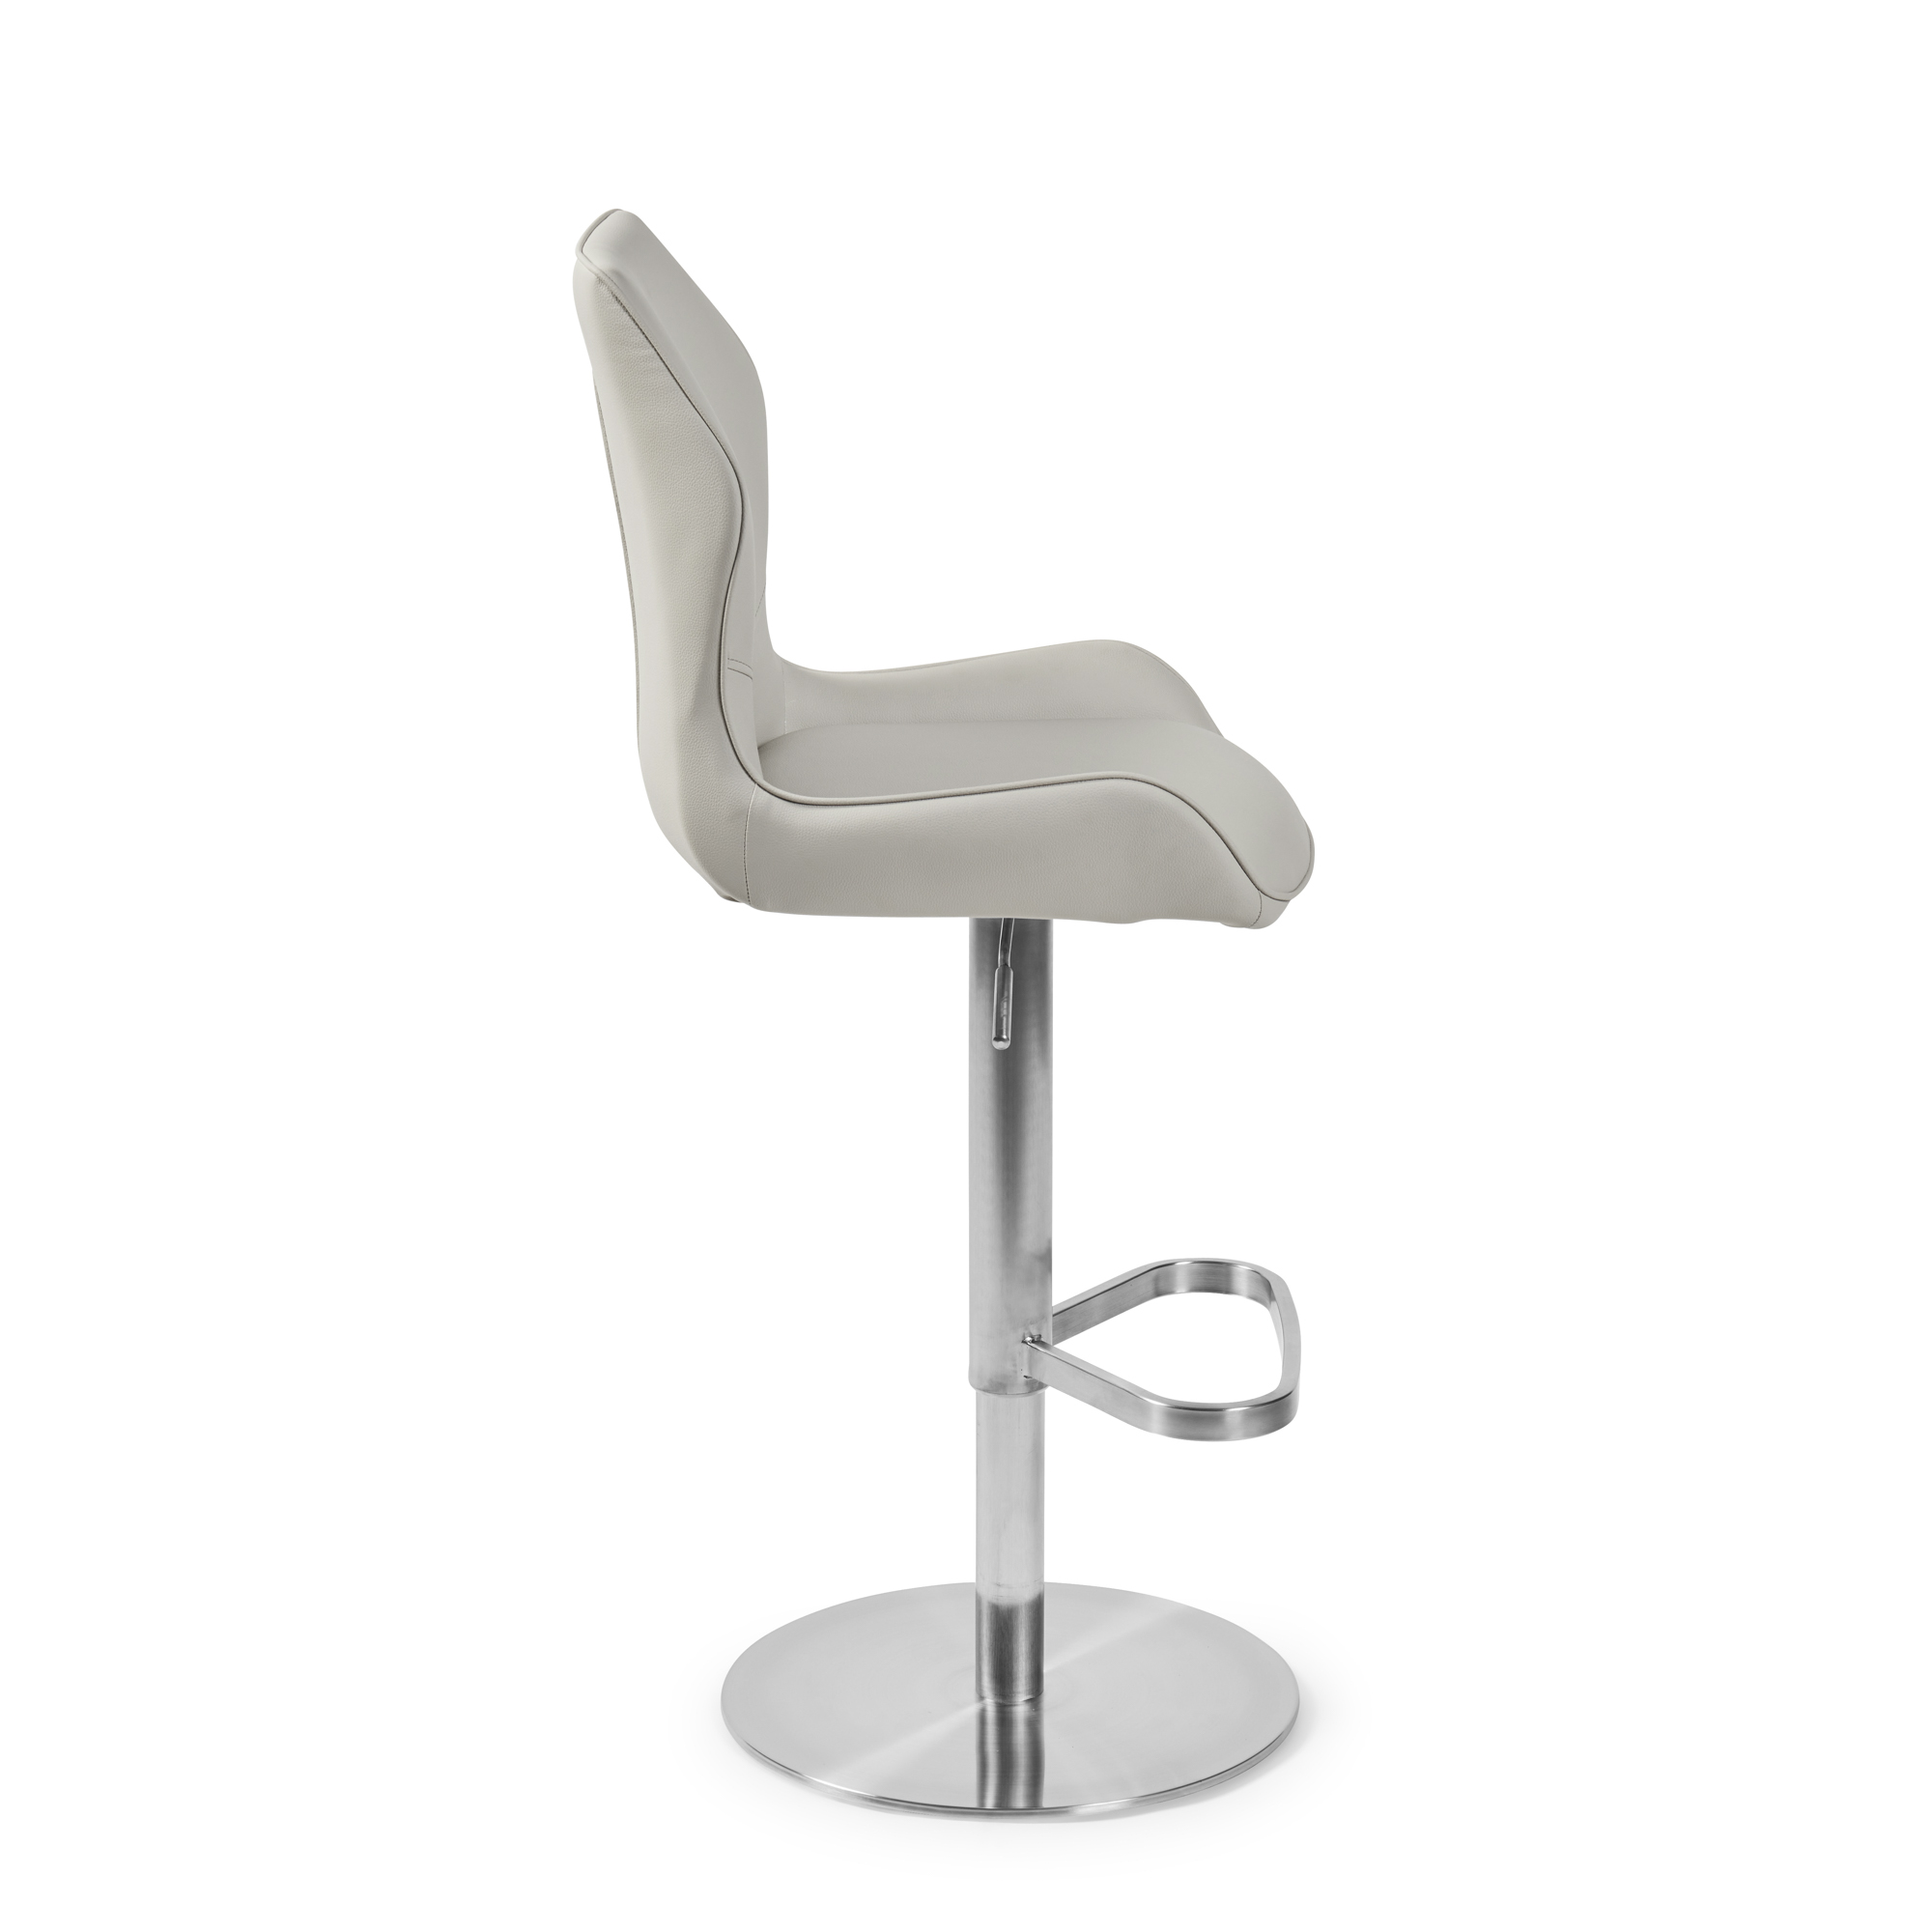 Virginia Brushed Steel Gas Lift Bar Stool in Beige Faux Leather